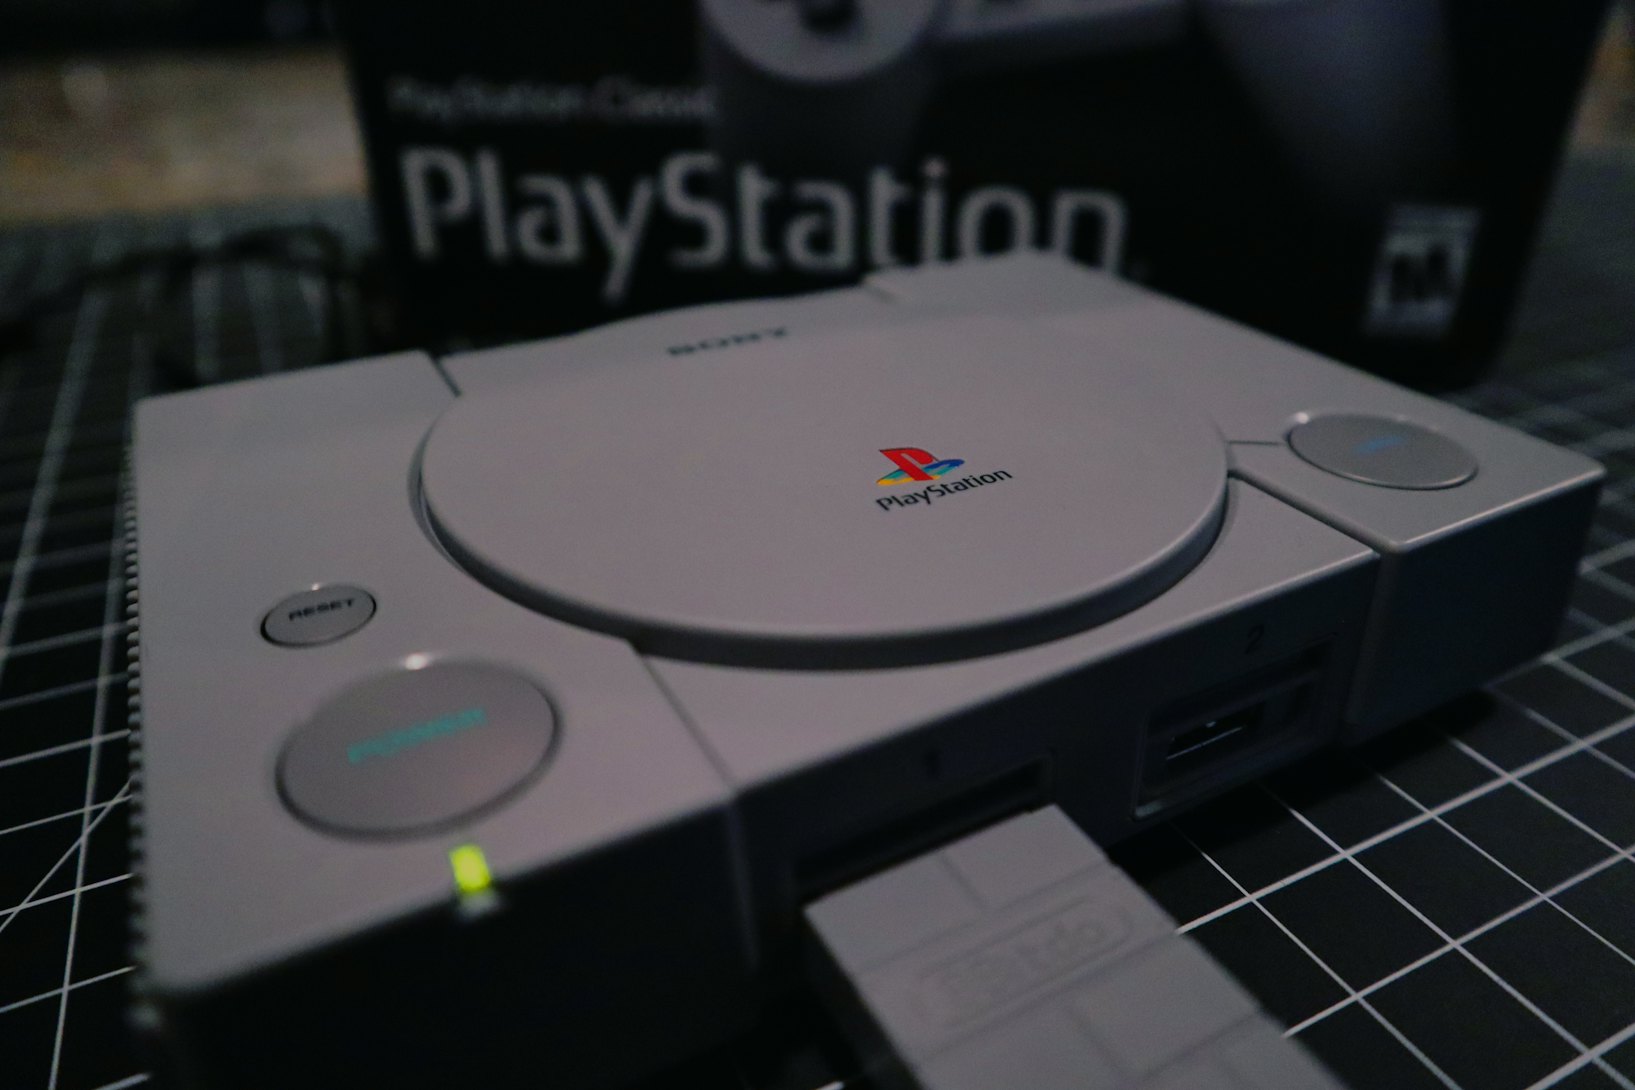 Sony PlayStation Classic games list: The 20 games on the retro console